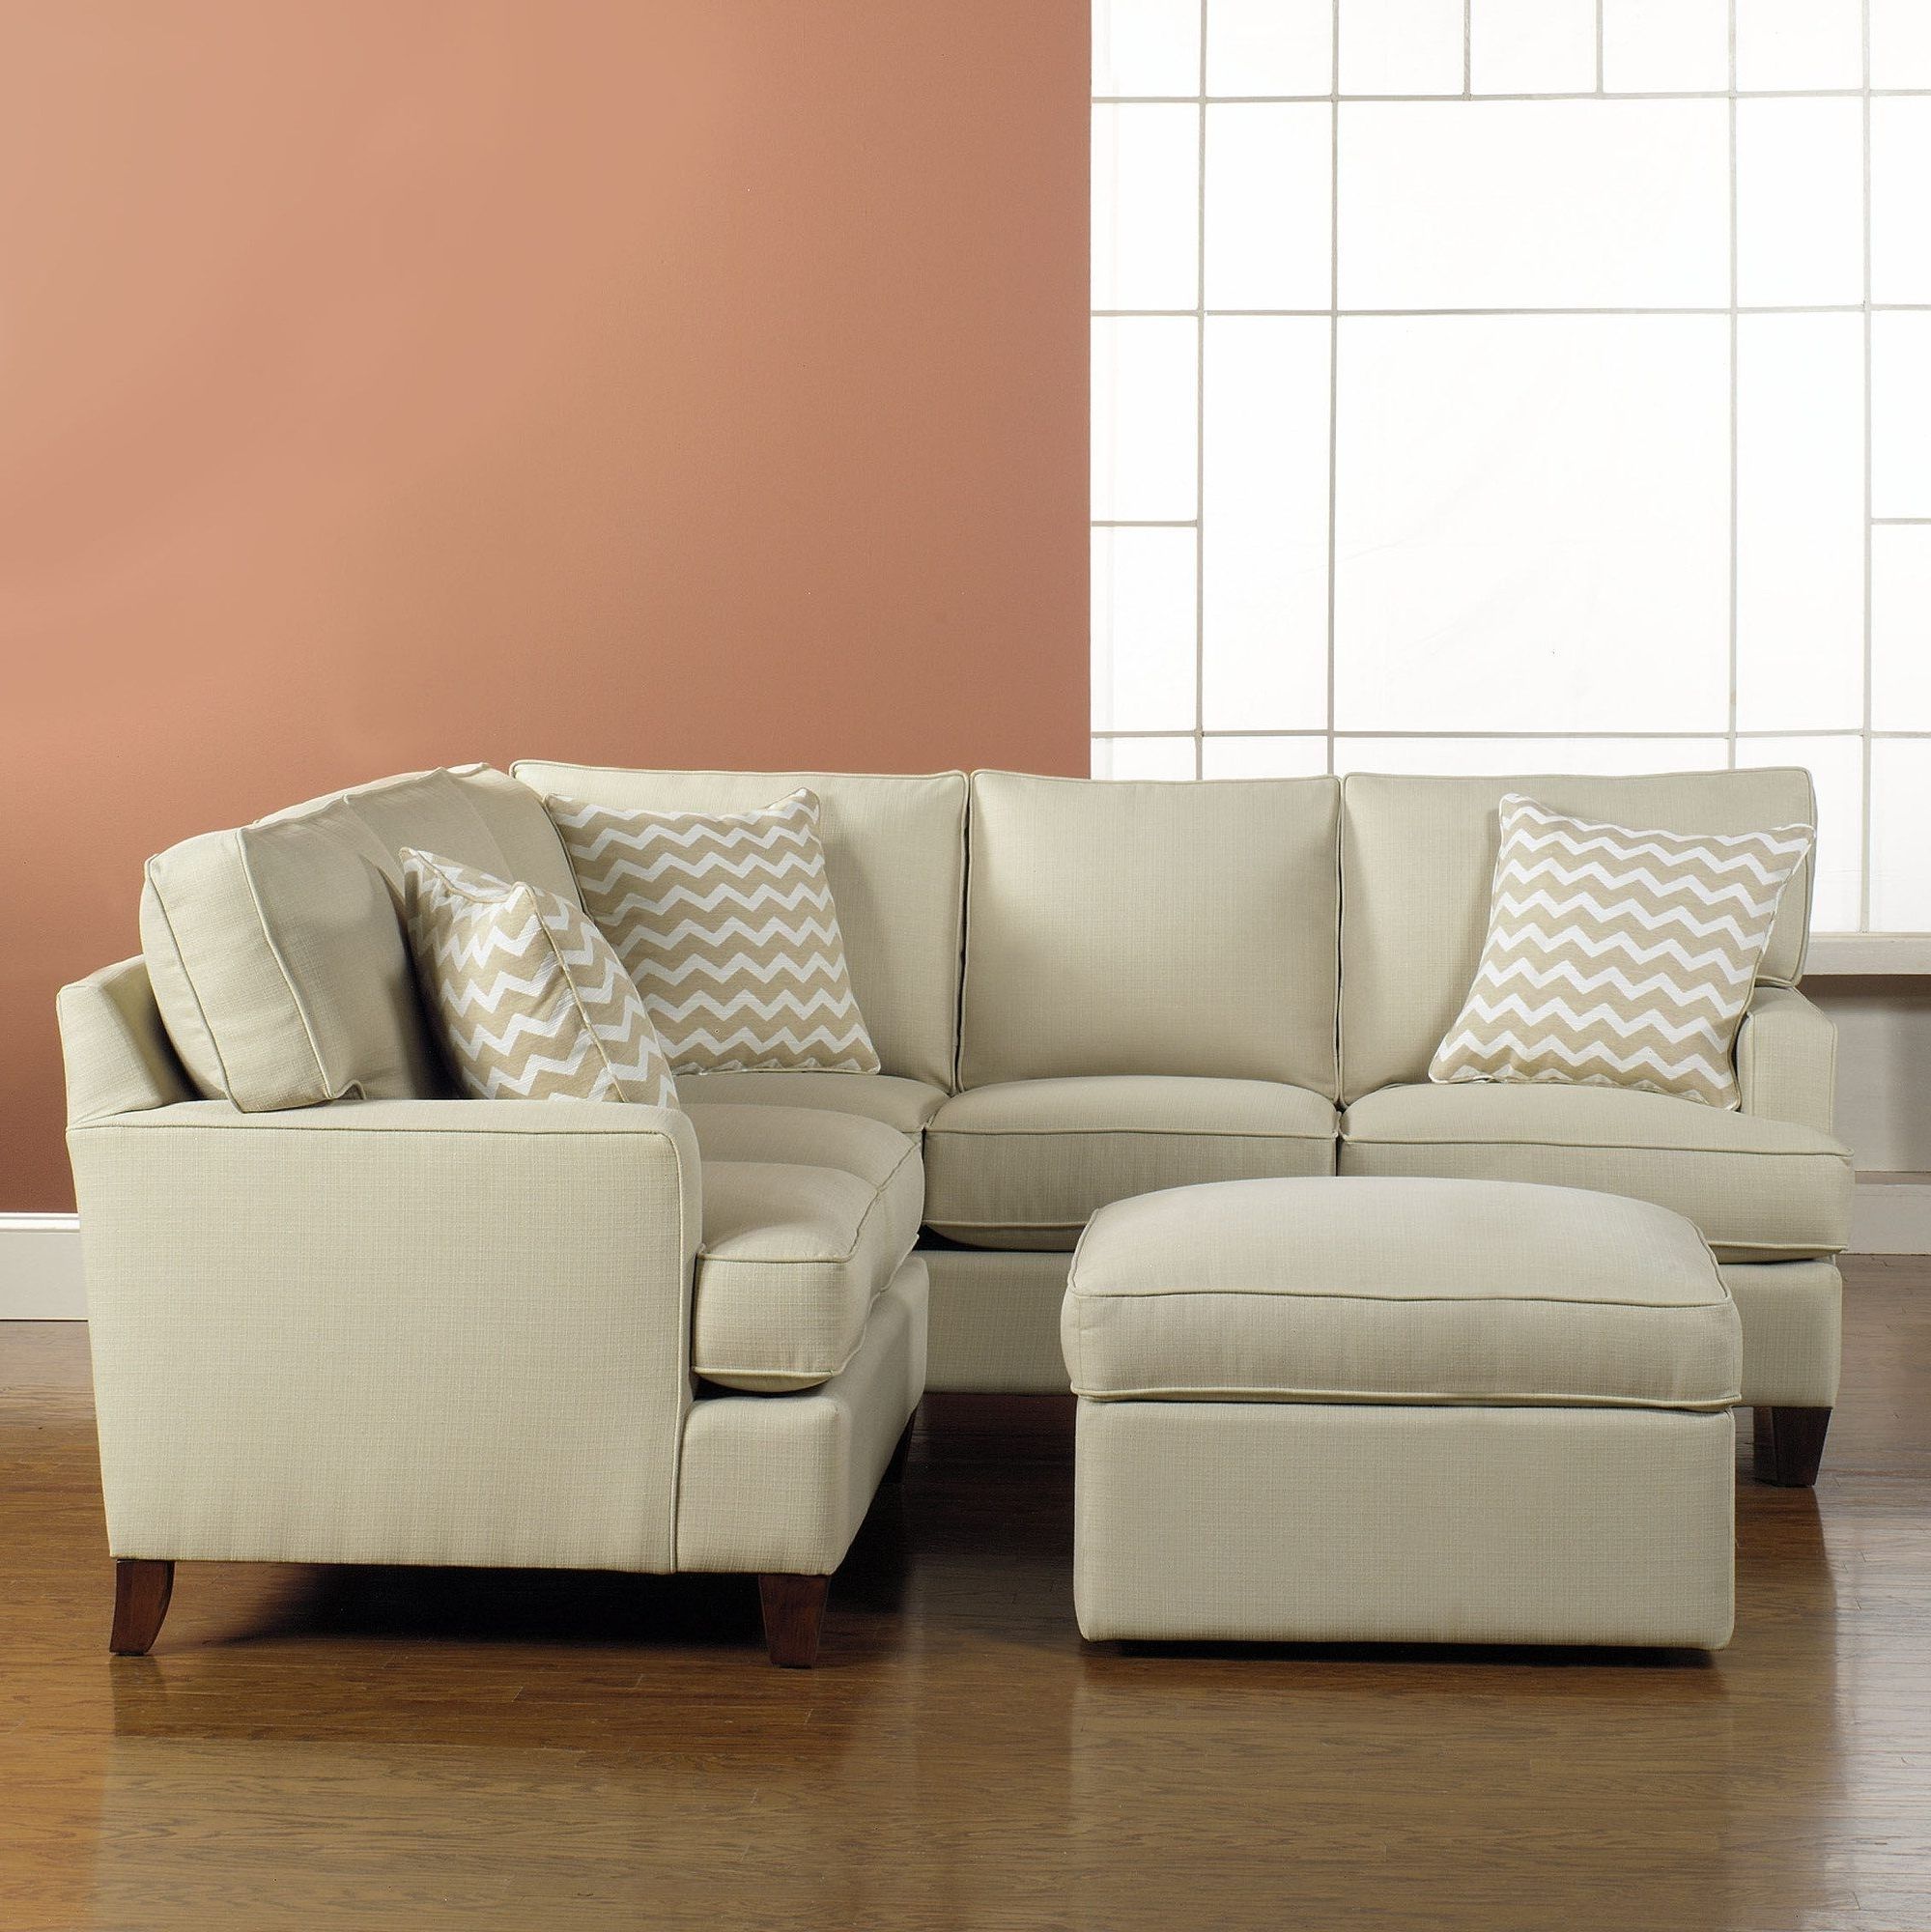 Famous Modern Sectional Sofas For Small Spaces Throughout Inspirational Sectional Sofas For Small Spaces 67 For Office Sofa (View 1 of 15)